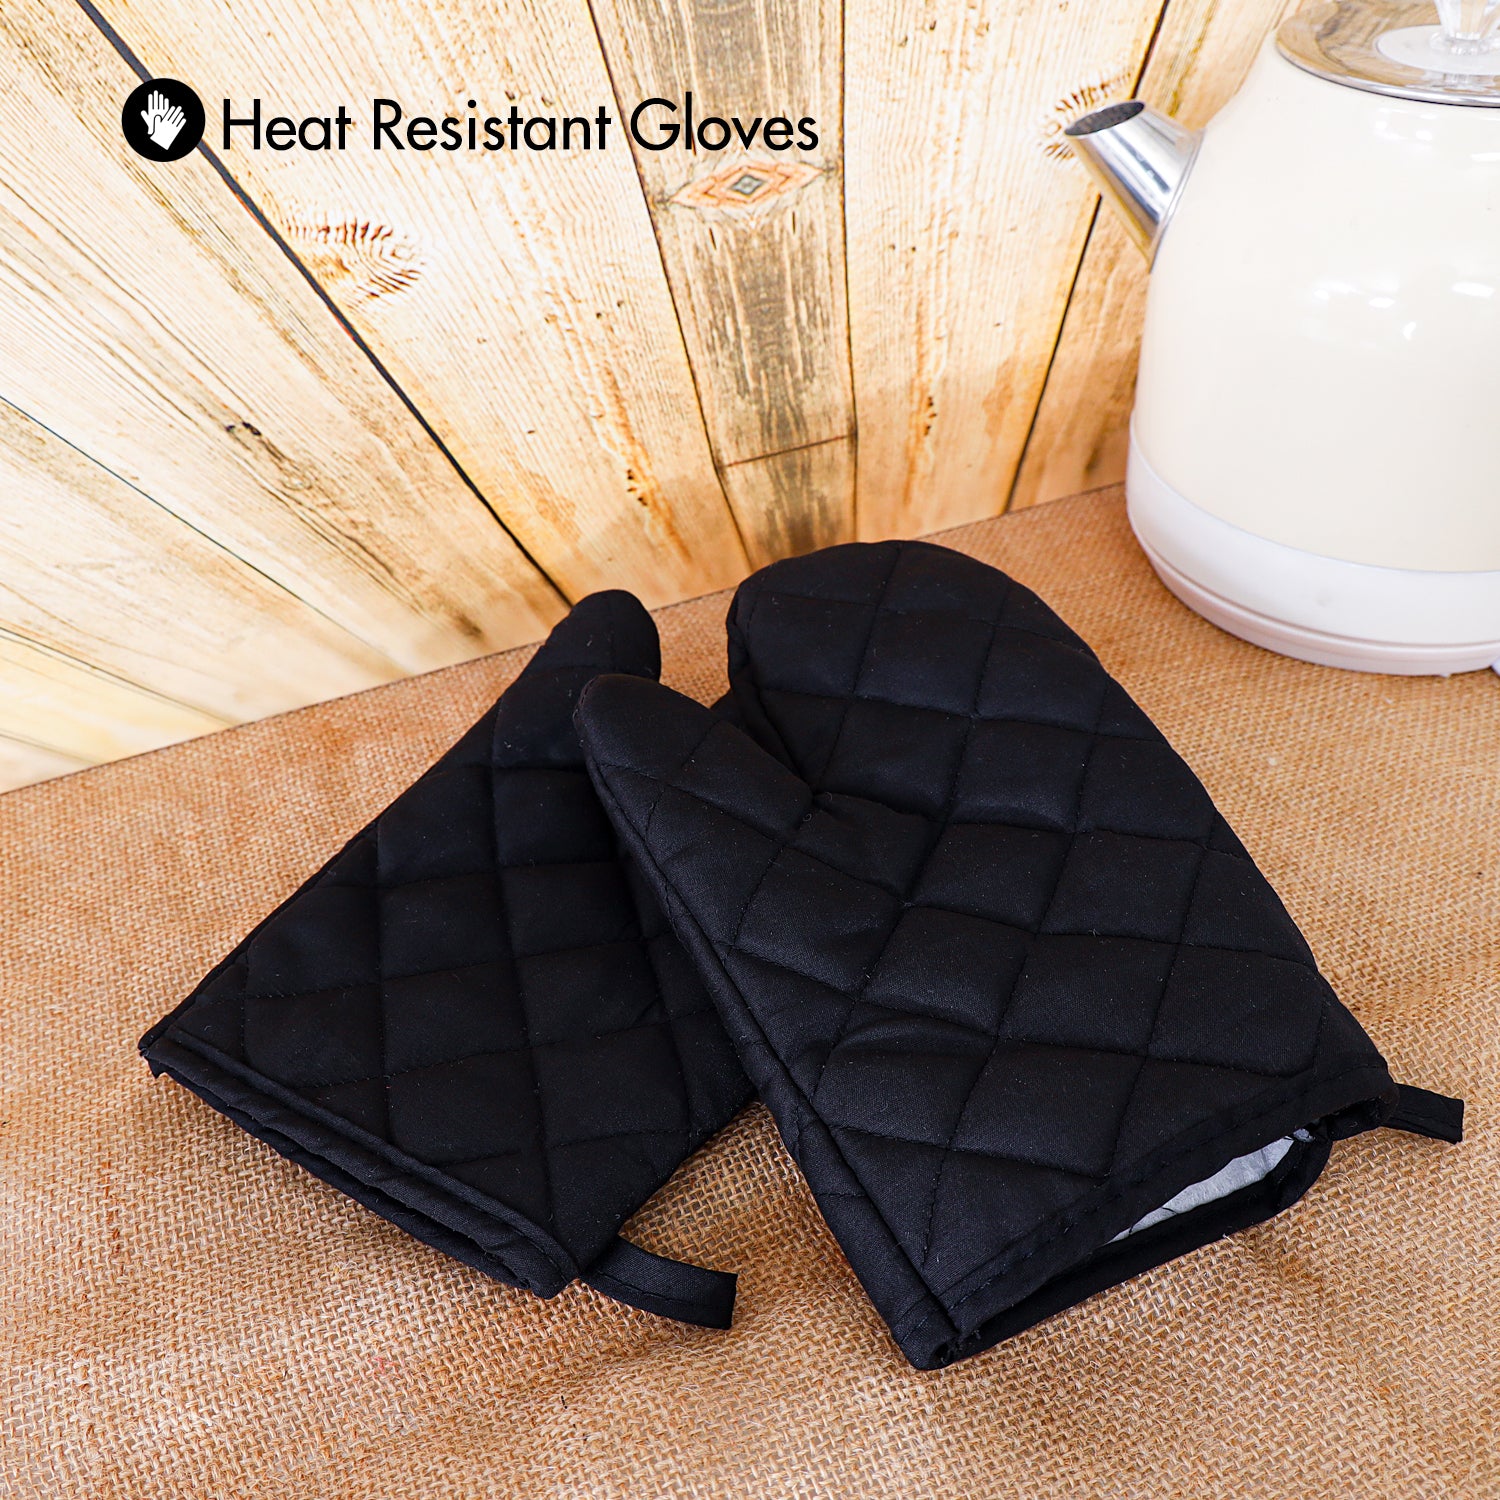 Royalford Heat Resistant Double Layered Cotton Oven Gloves Royalford 